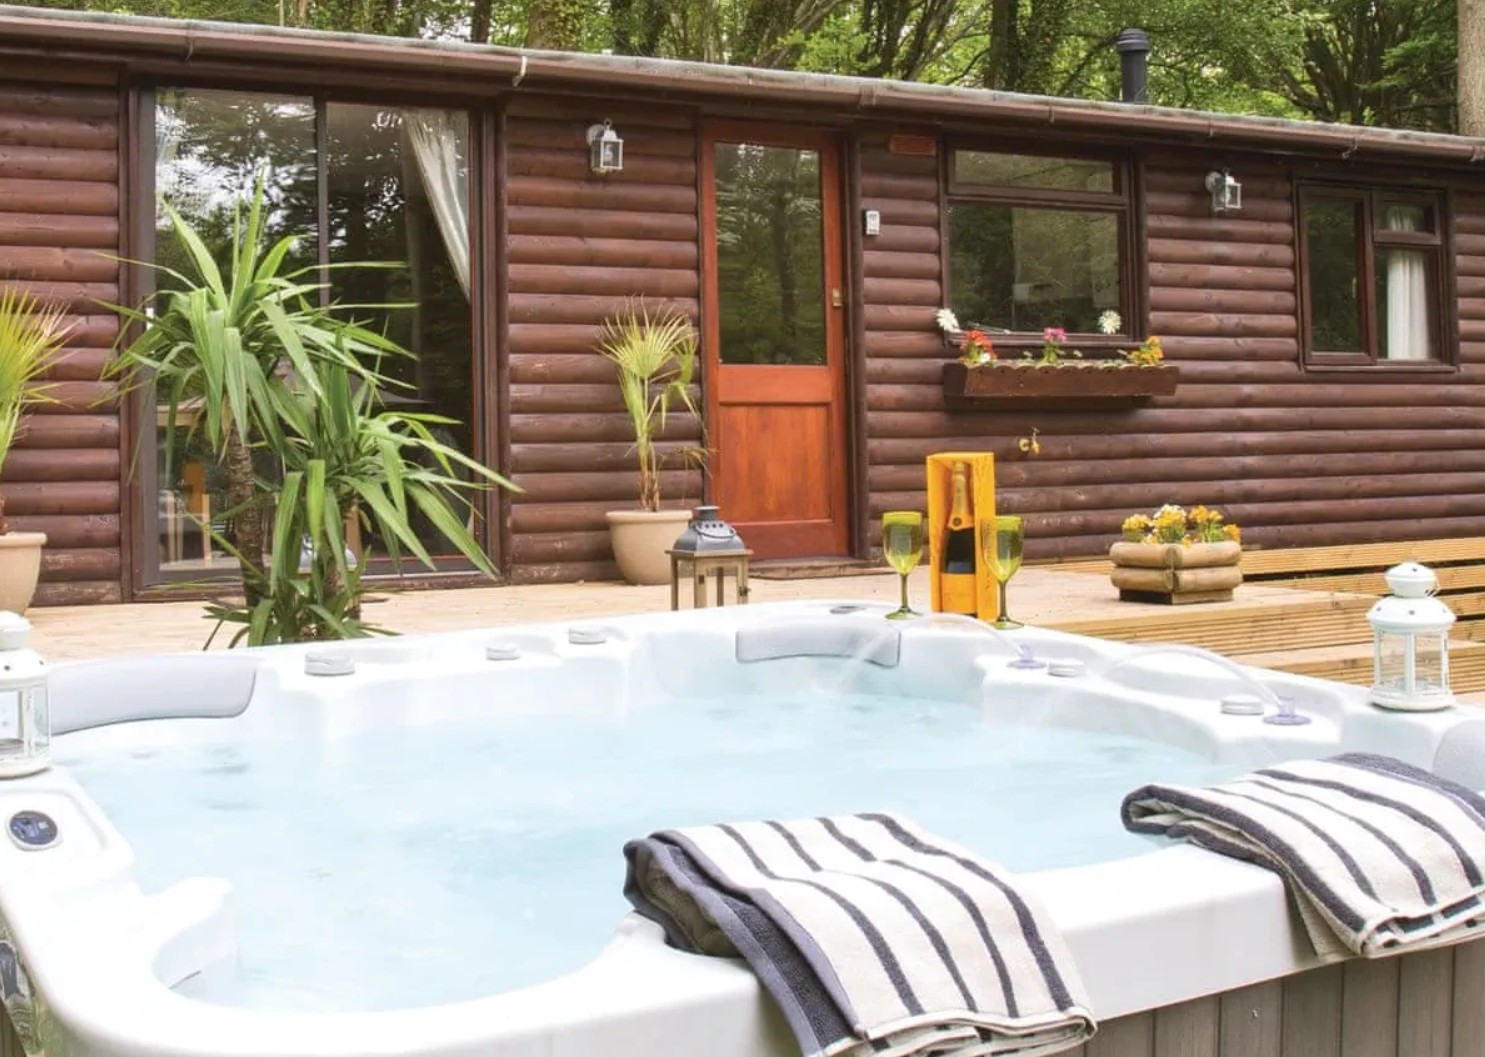 Lodge with a hot tub in Snowdonia, North Wales